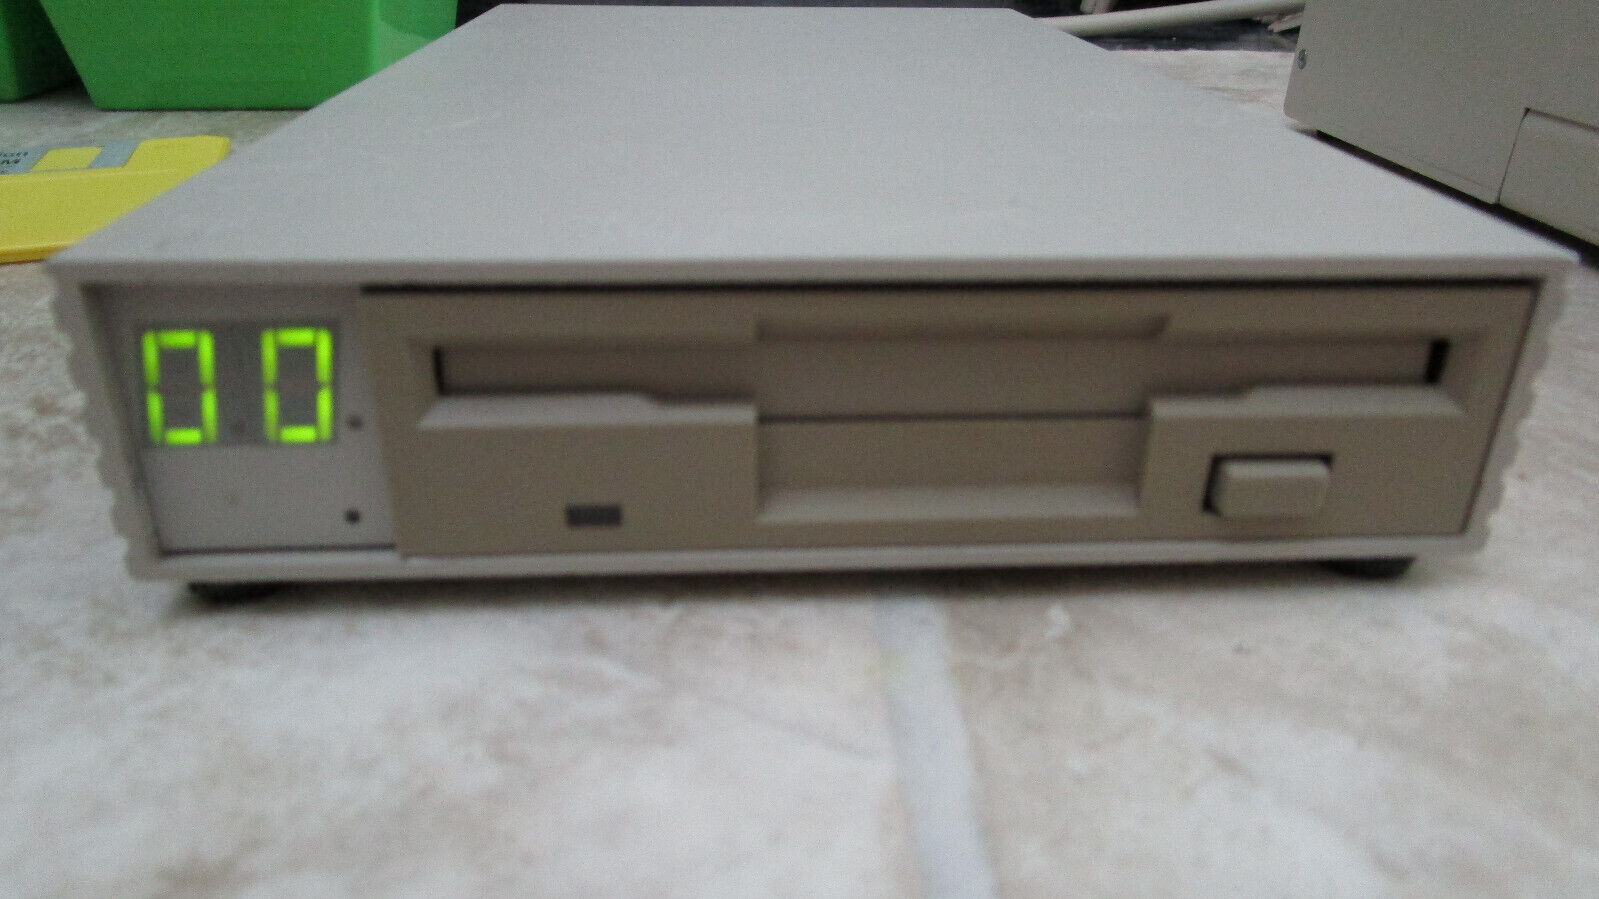 MAST ENHANCED UNIDRIVE FLOPPY DRIVE UNIT FOR AMIGA TESTED AND WORKING LOT #3